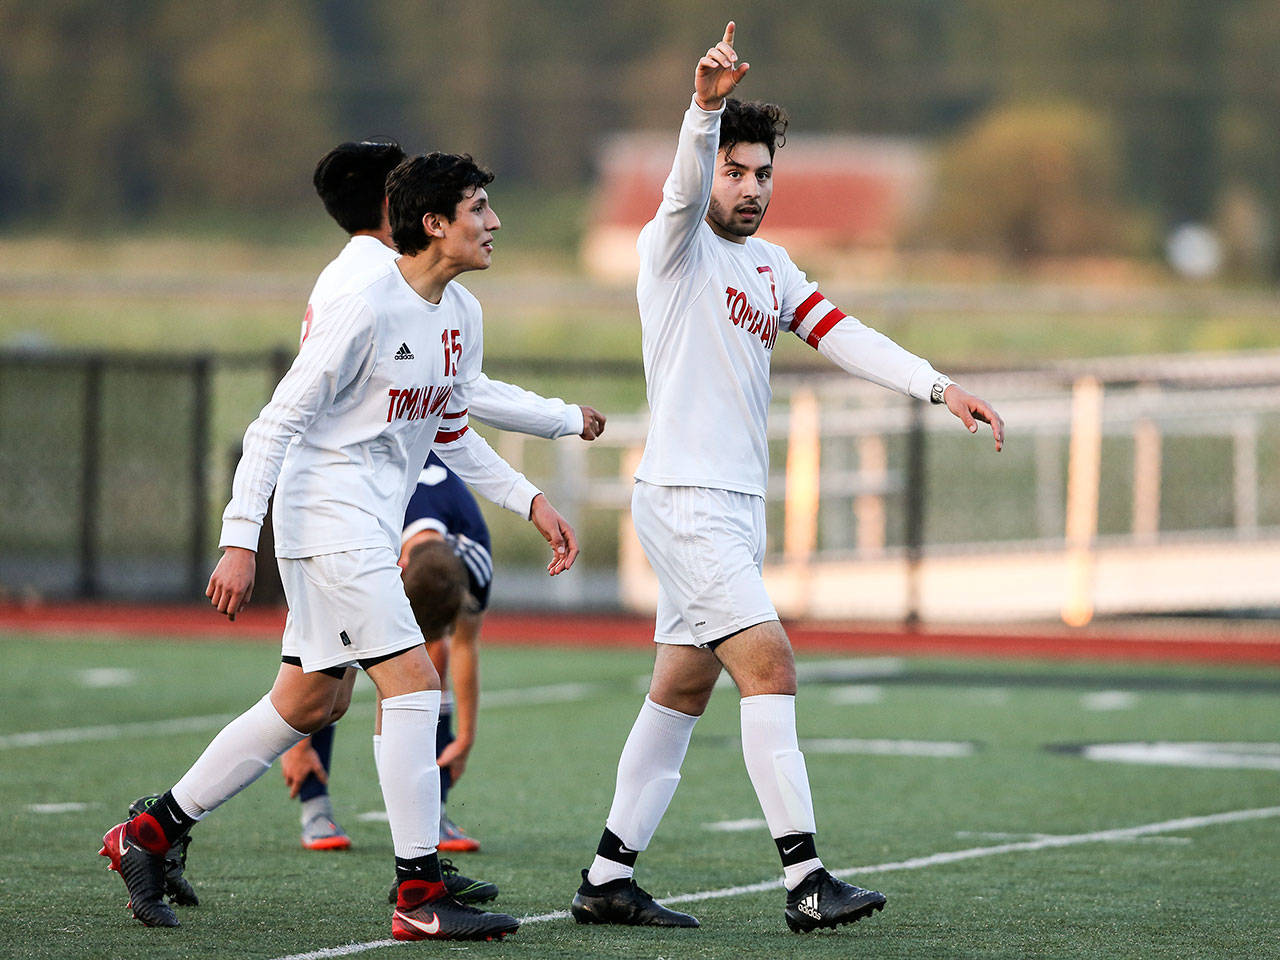 Marysville-Pilchuck’s Daniel Amador points to the stands after scoring a goal as Marysville Pilchuck beat Arlington 3-2 in a boys’ soccer match and clinched the Wesco 3A title on Tuesday, May 1, 2018 in Marysville. (Andy Bronson / The Herald)